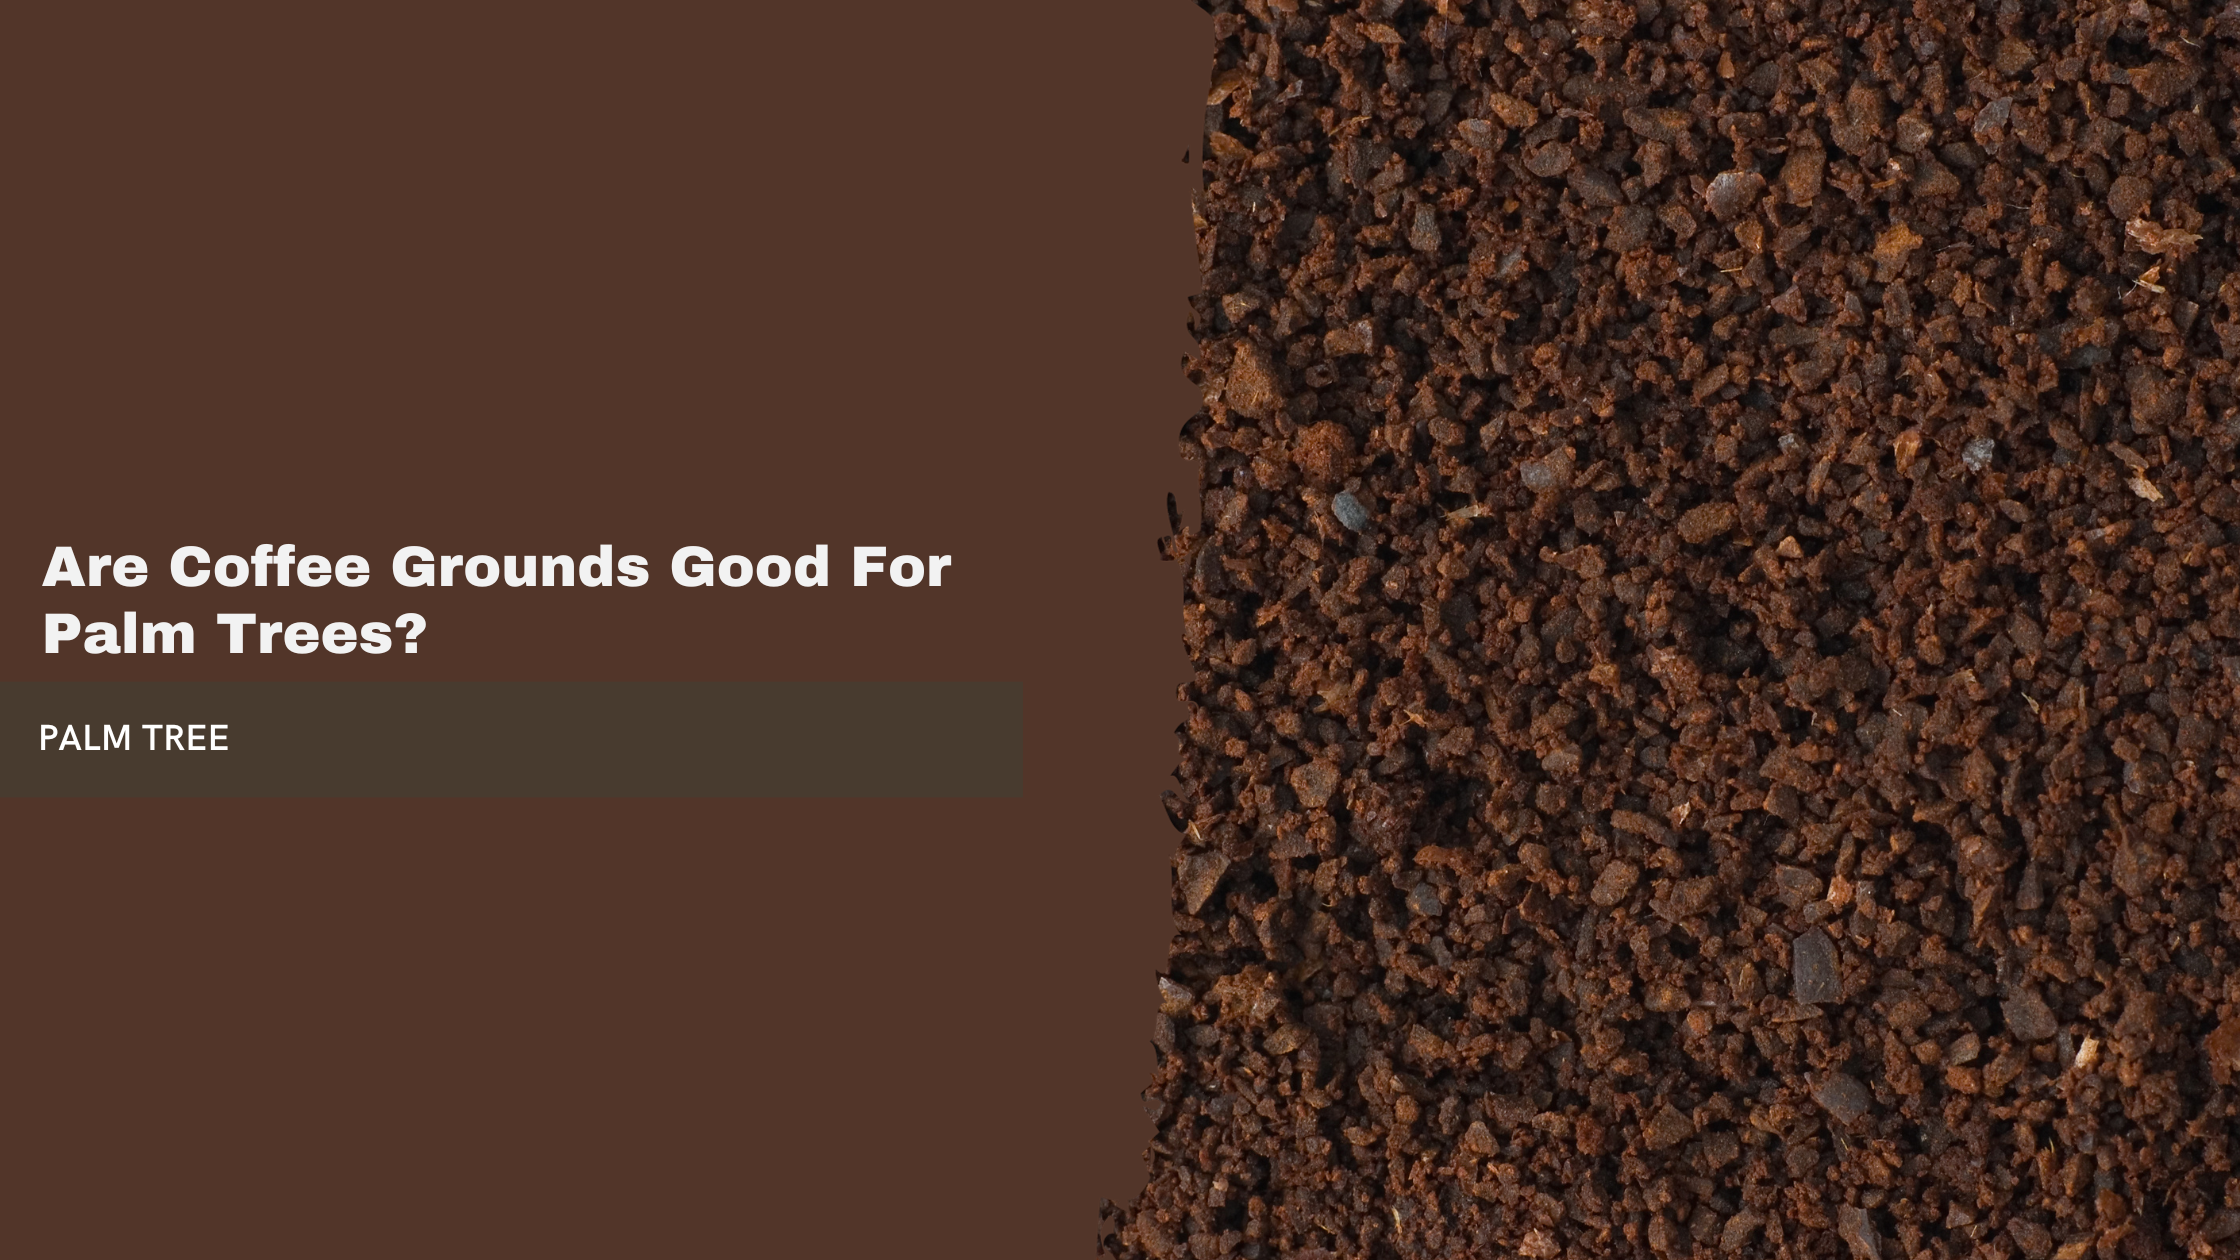 Are Coffee Grounds Good For Palm Trees?